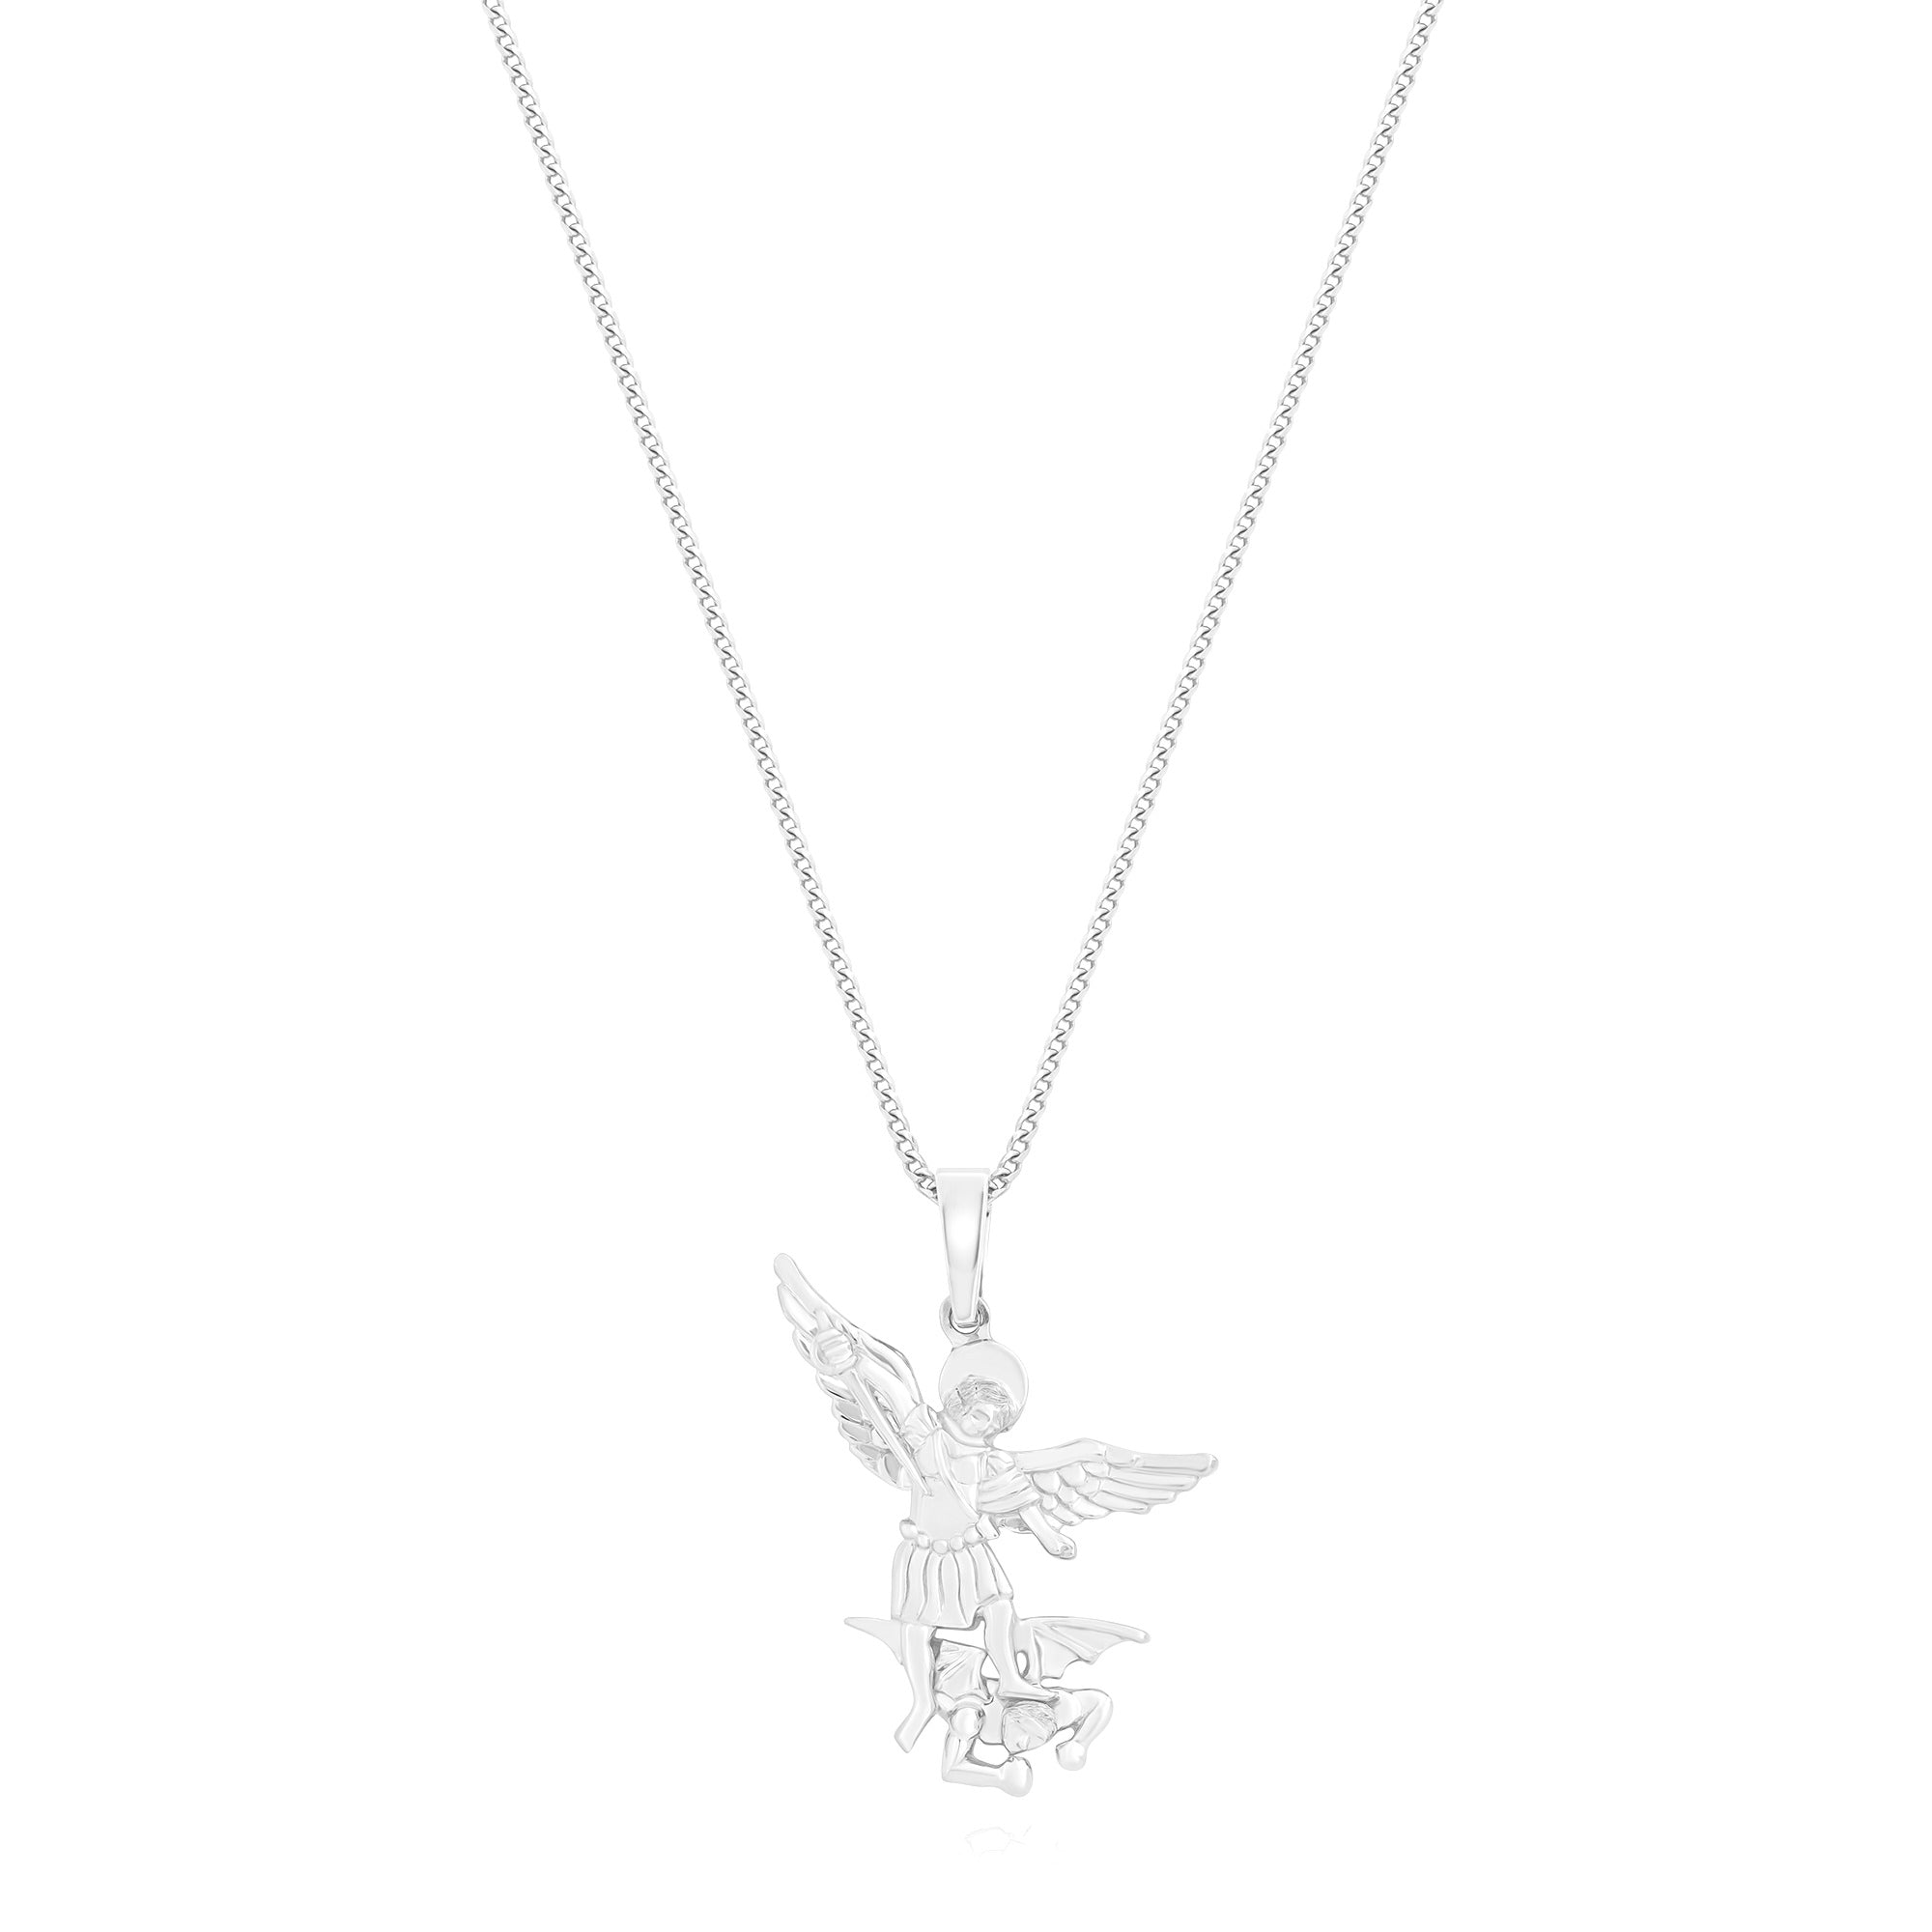 Micro Saint Michael Arch Angel Piece (Solid Gold) (14K WHITE GOLD) - IF & Co. Custom Jewelers